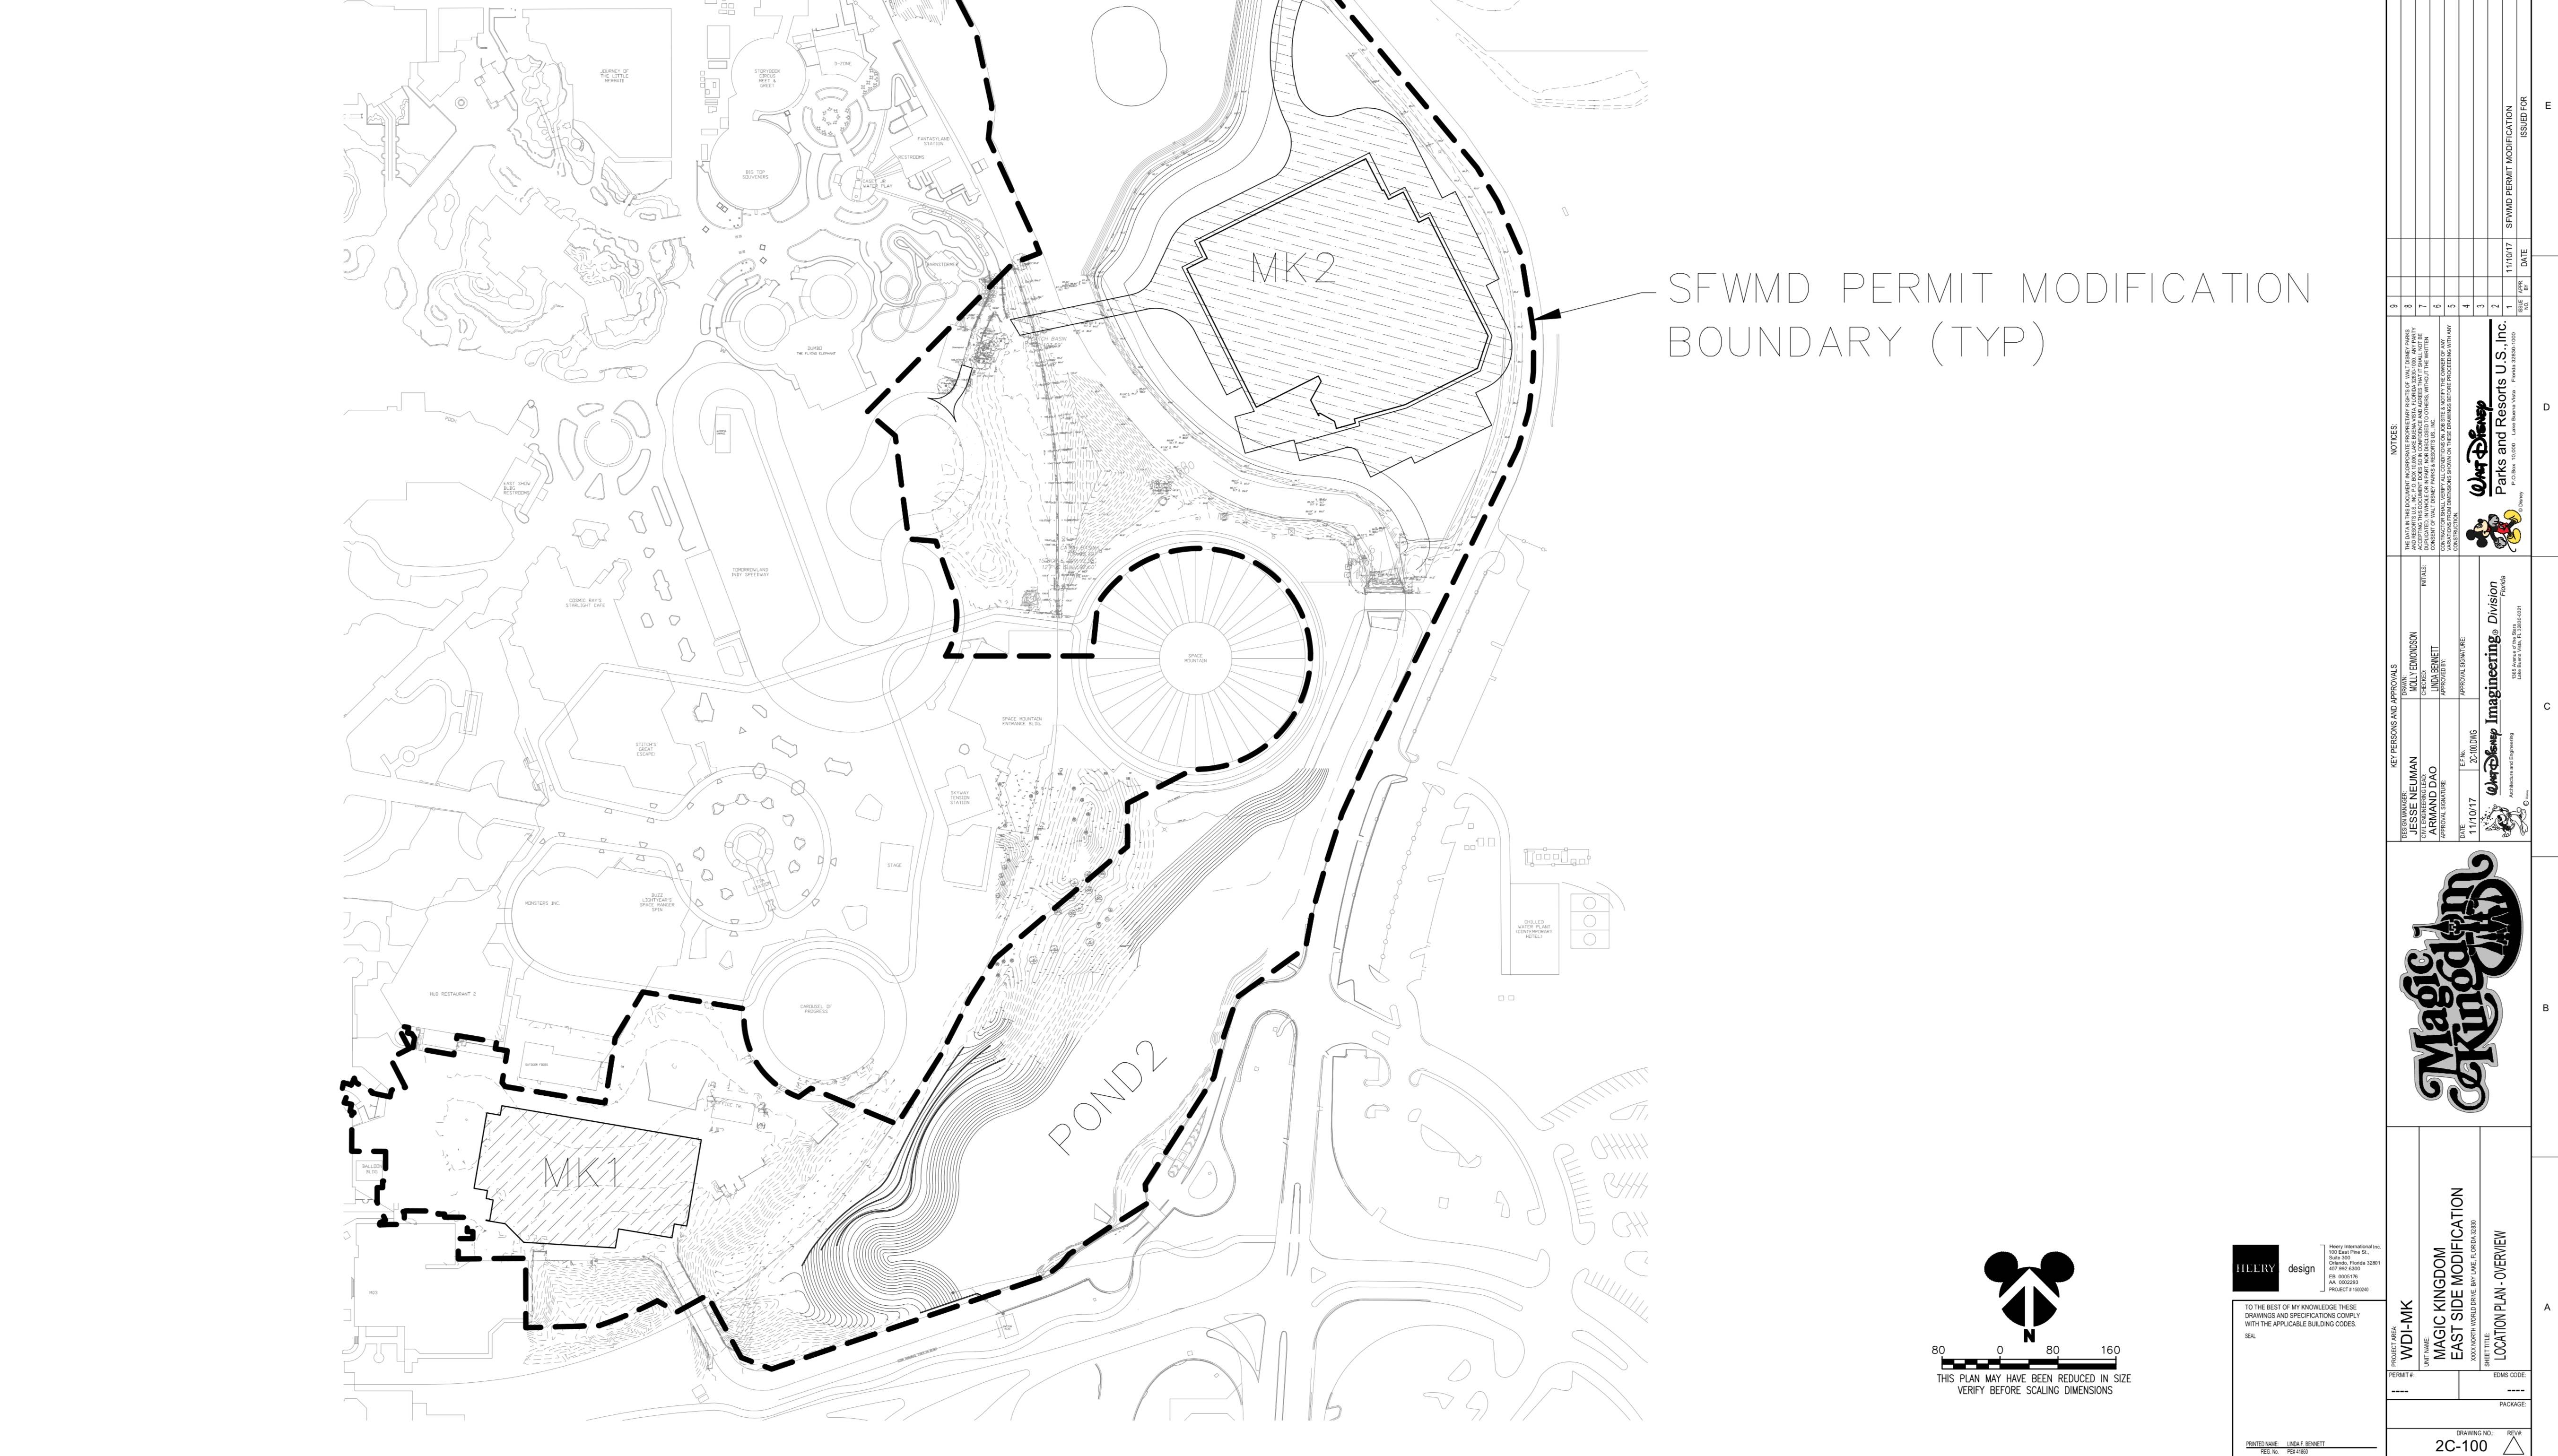 PHOTO - Recently filed permits show the precise location of the TRON coaster and new Main Street Theater